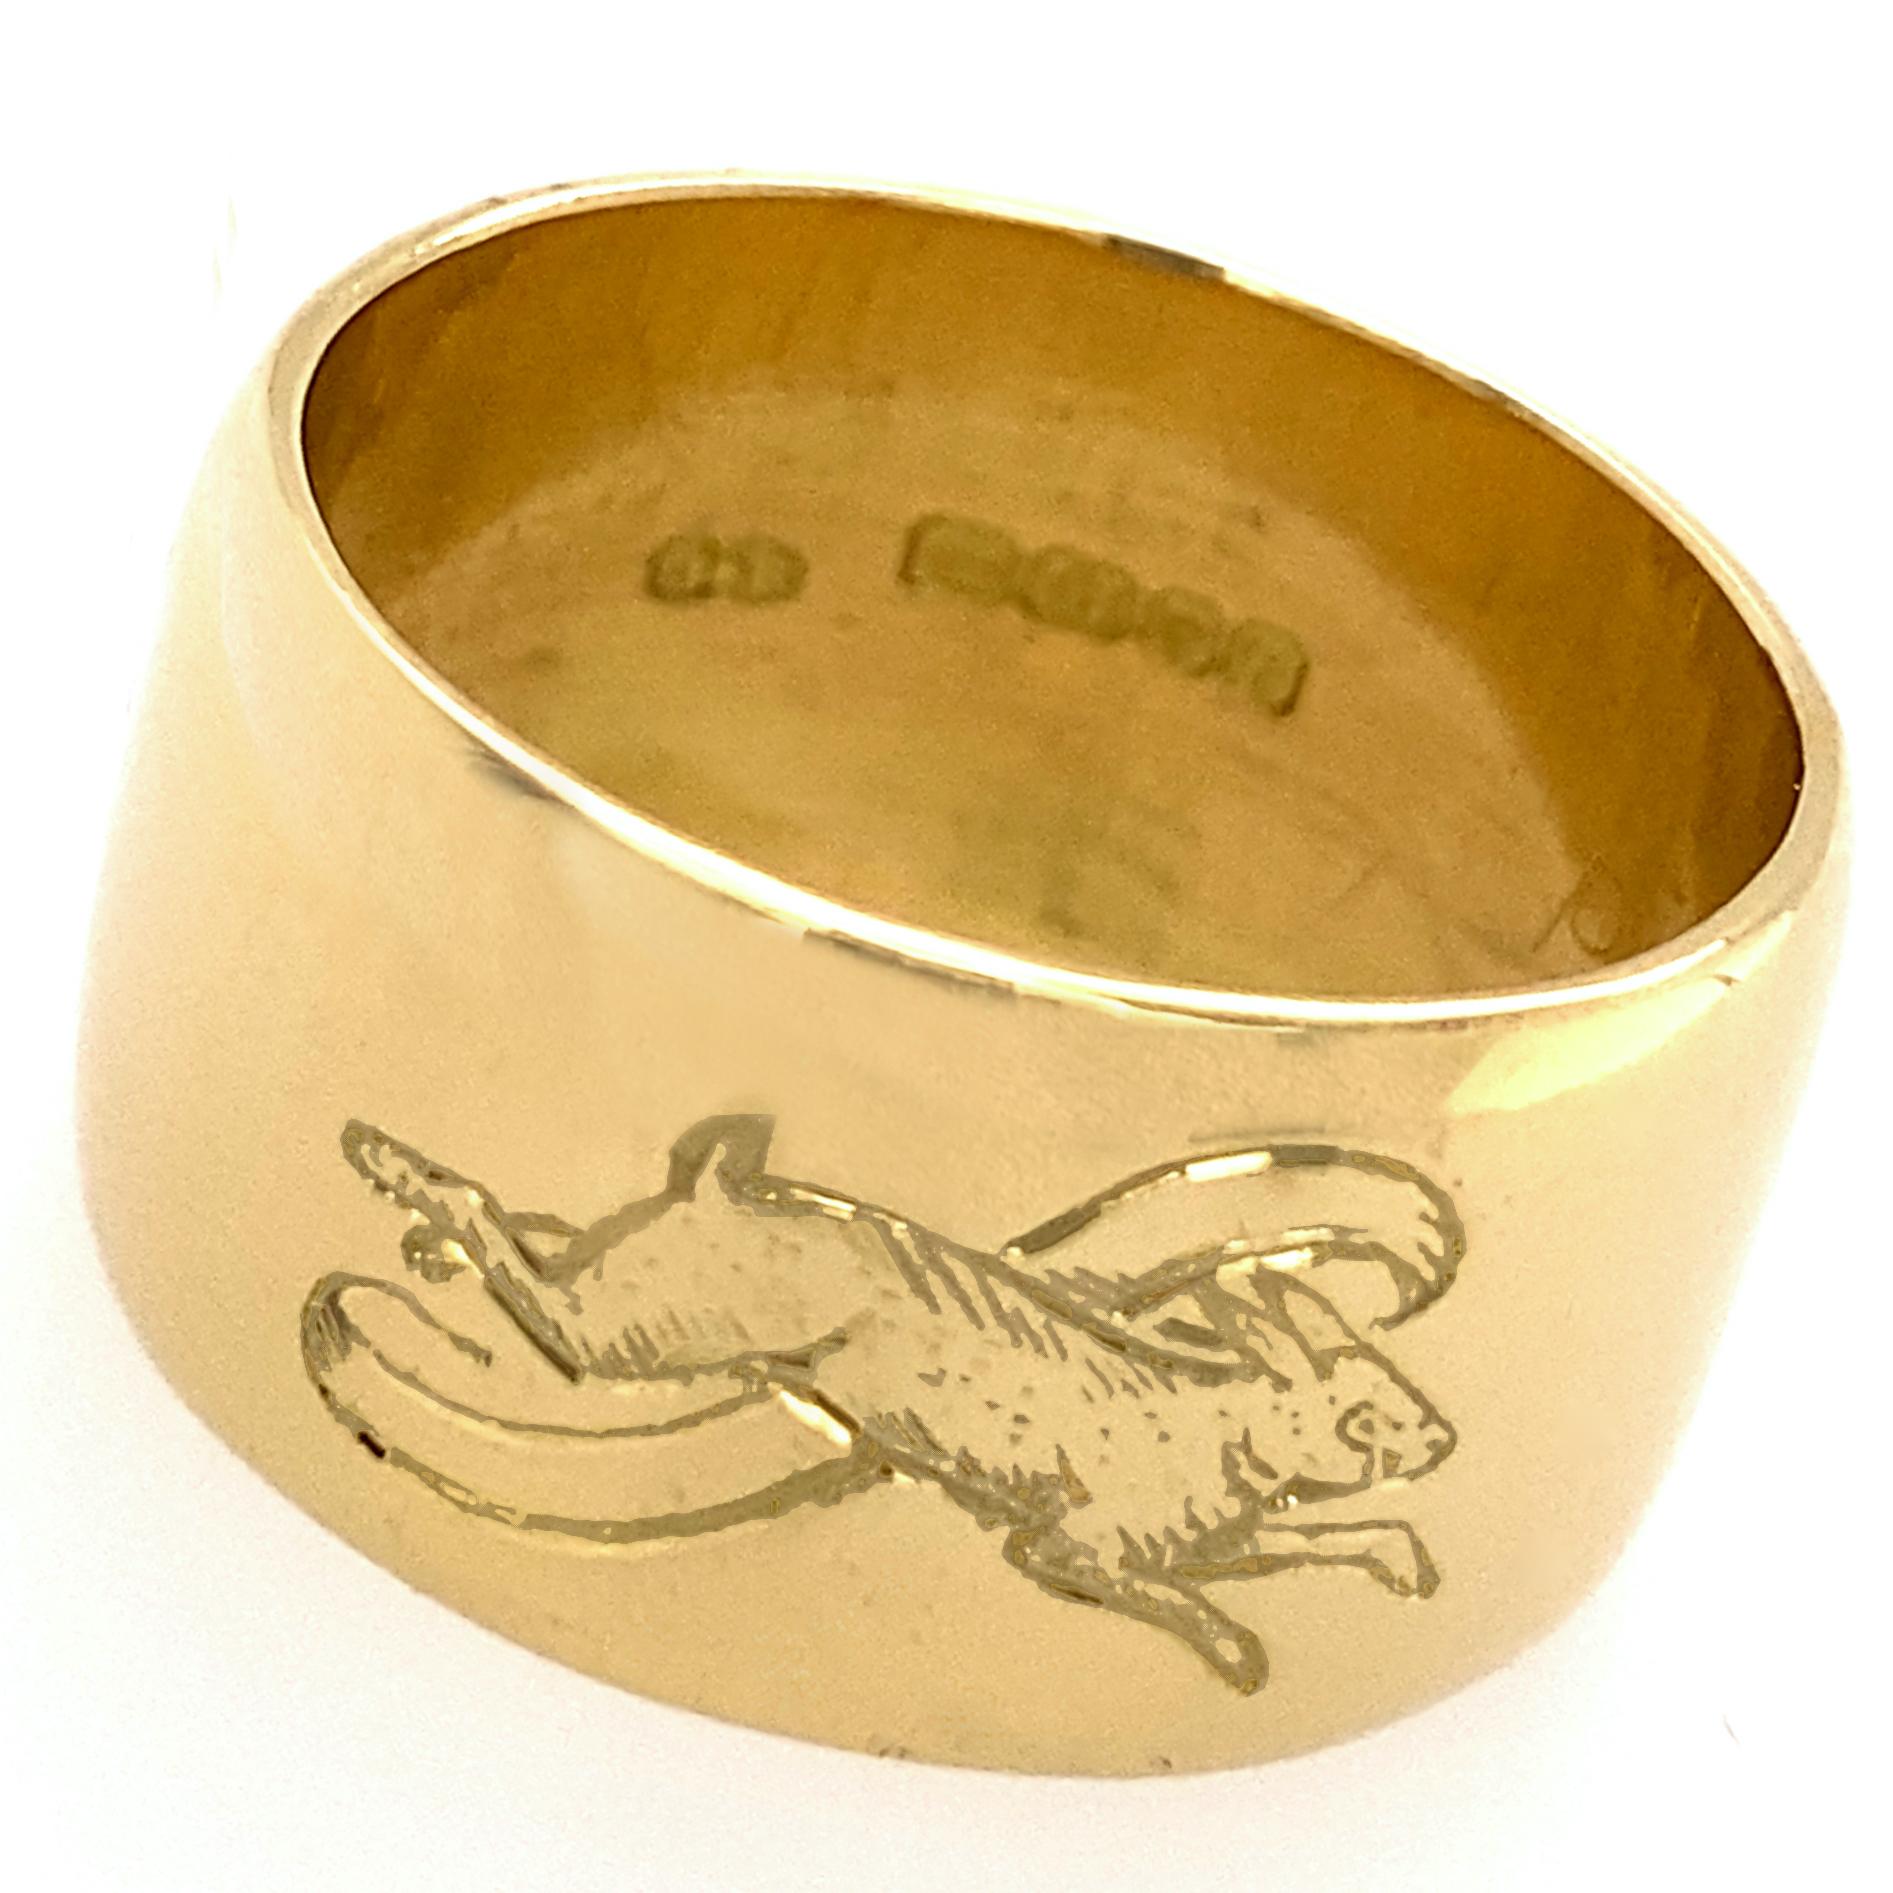 This unusual cigar band ring in polished 18 karat yellow gold features two different rabbit engravings.  

Rabbits symbolize wisdom, resurrection, mercy, beauty, abundance and prosperity, and lots of other good things.  Symbolism the world over has